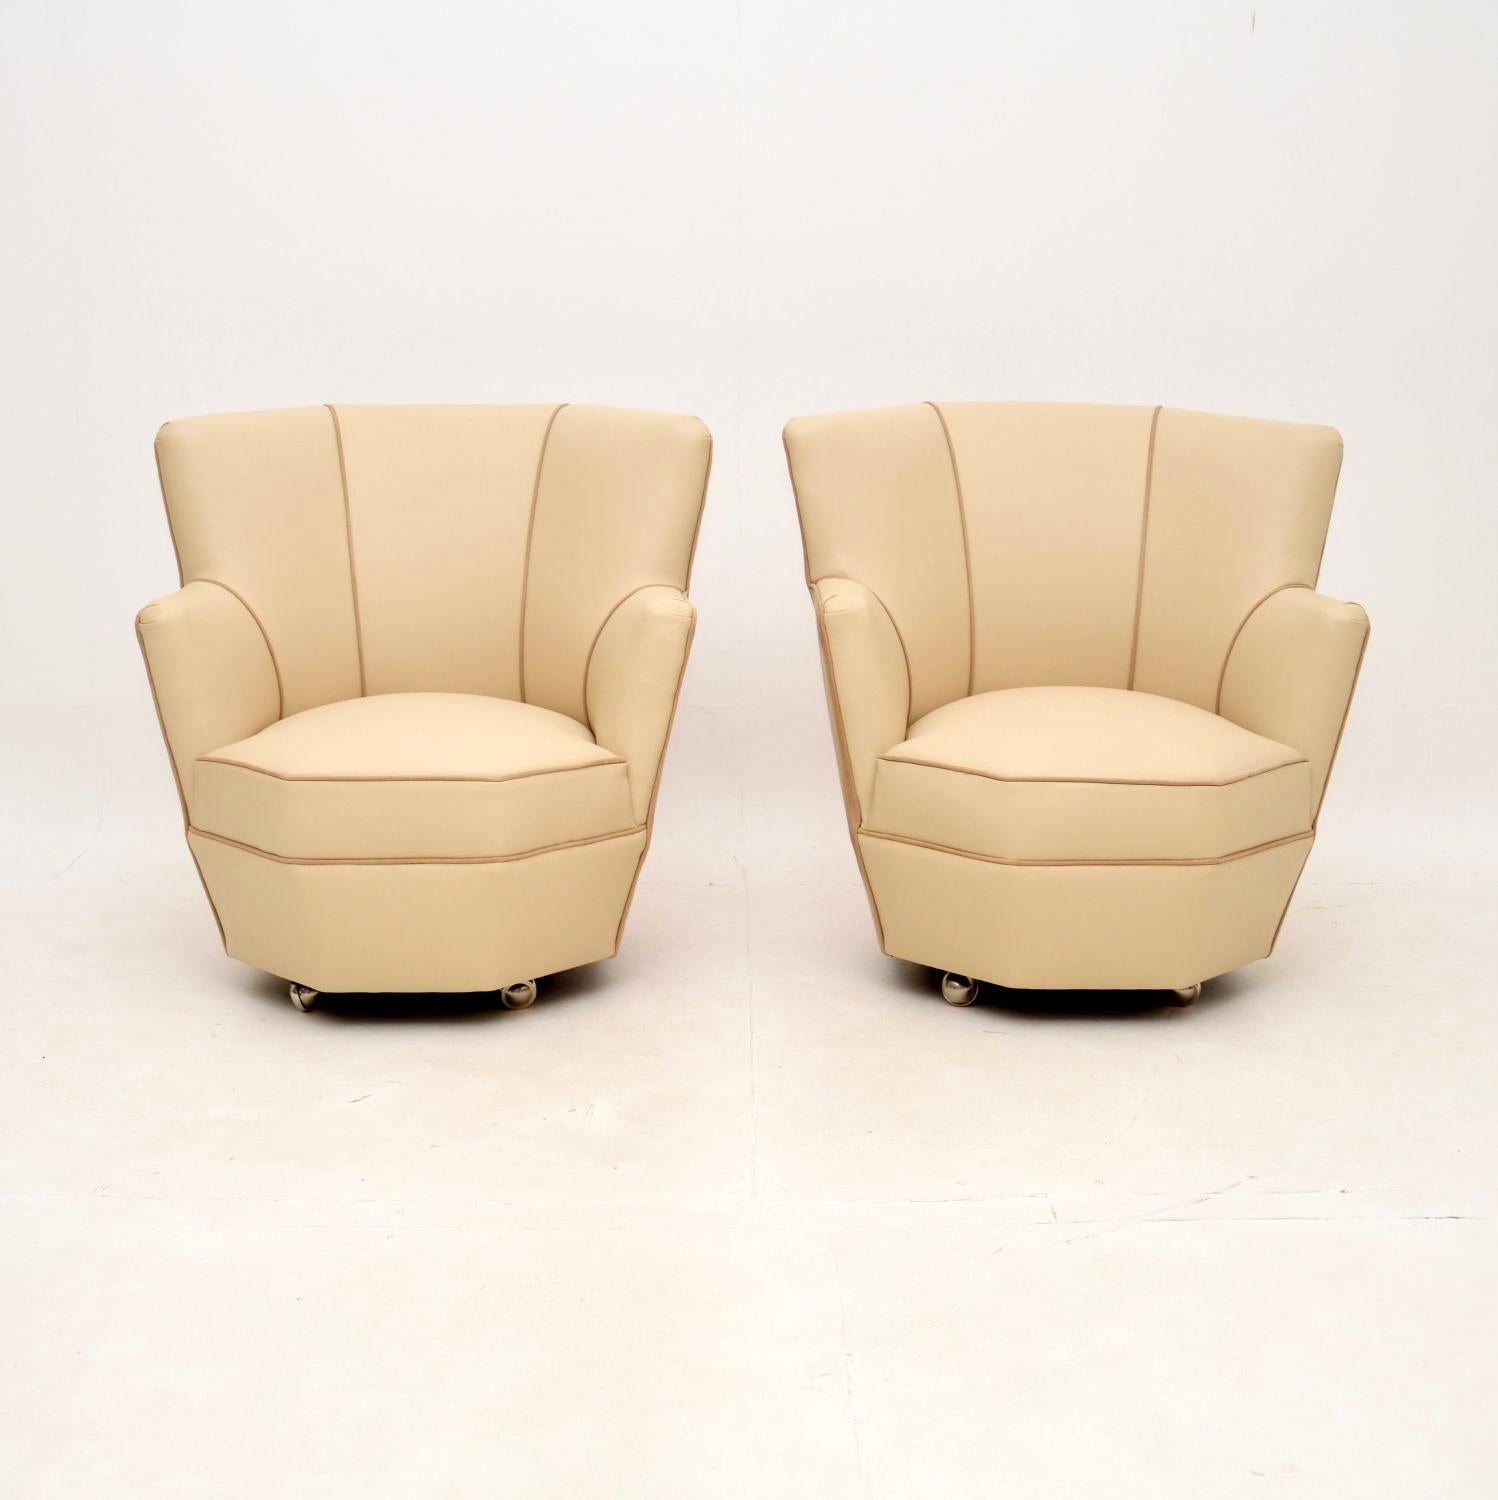 A stunning pair of Art Deco leather and suede cocktail armchairs. They were made in England, they date from the 1920-30’s.

They are of superb quality and are a lovely, petite size. They are perfect for cocktail lounge chairs and would also work